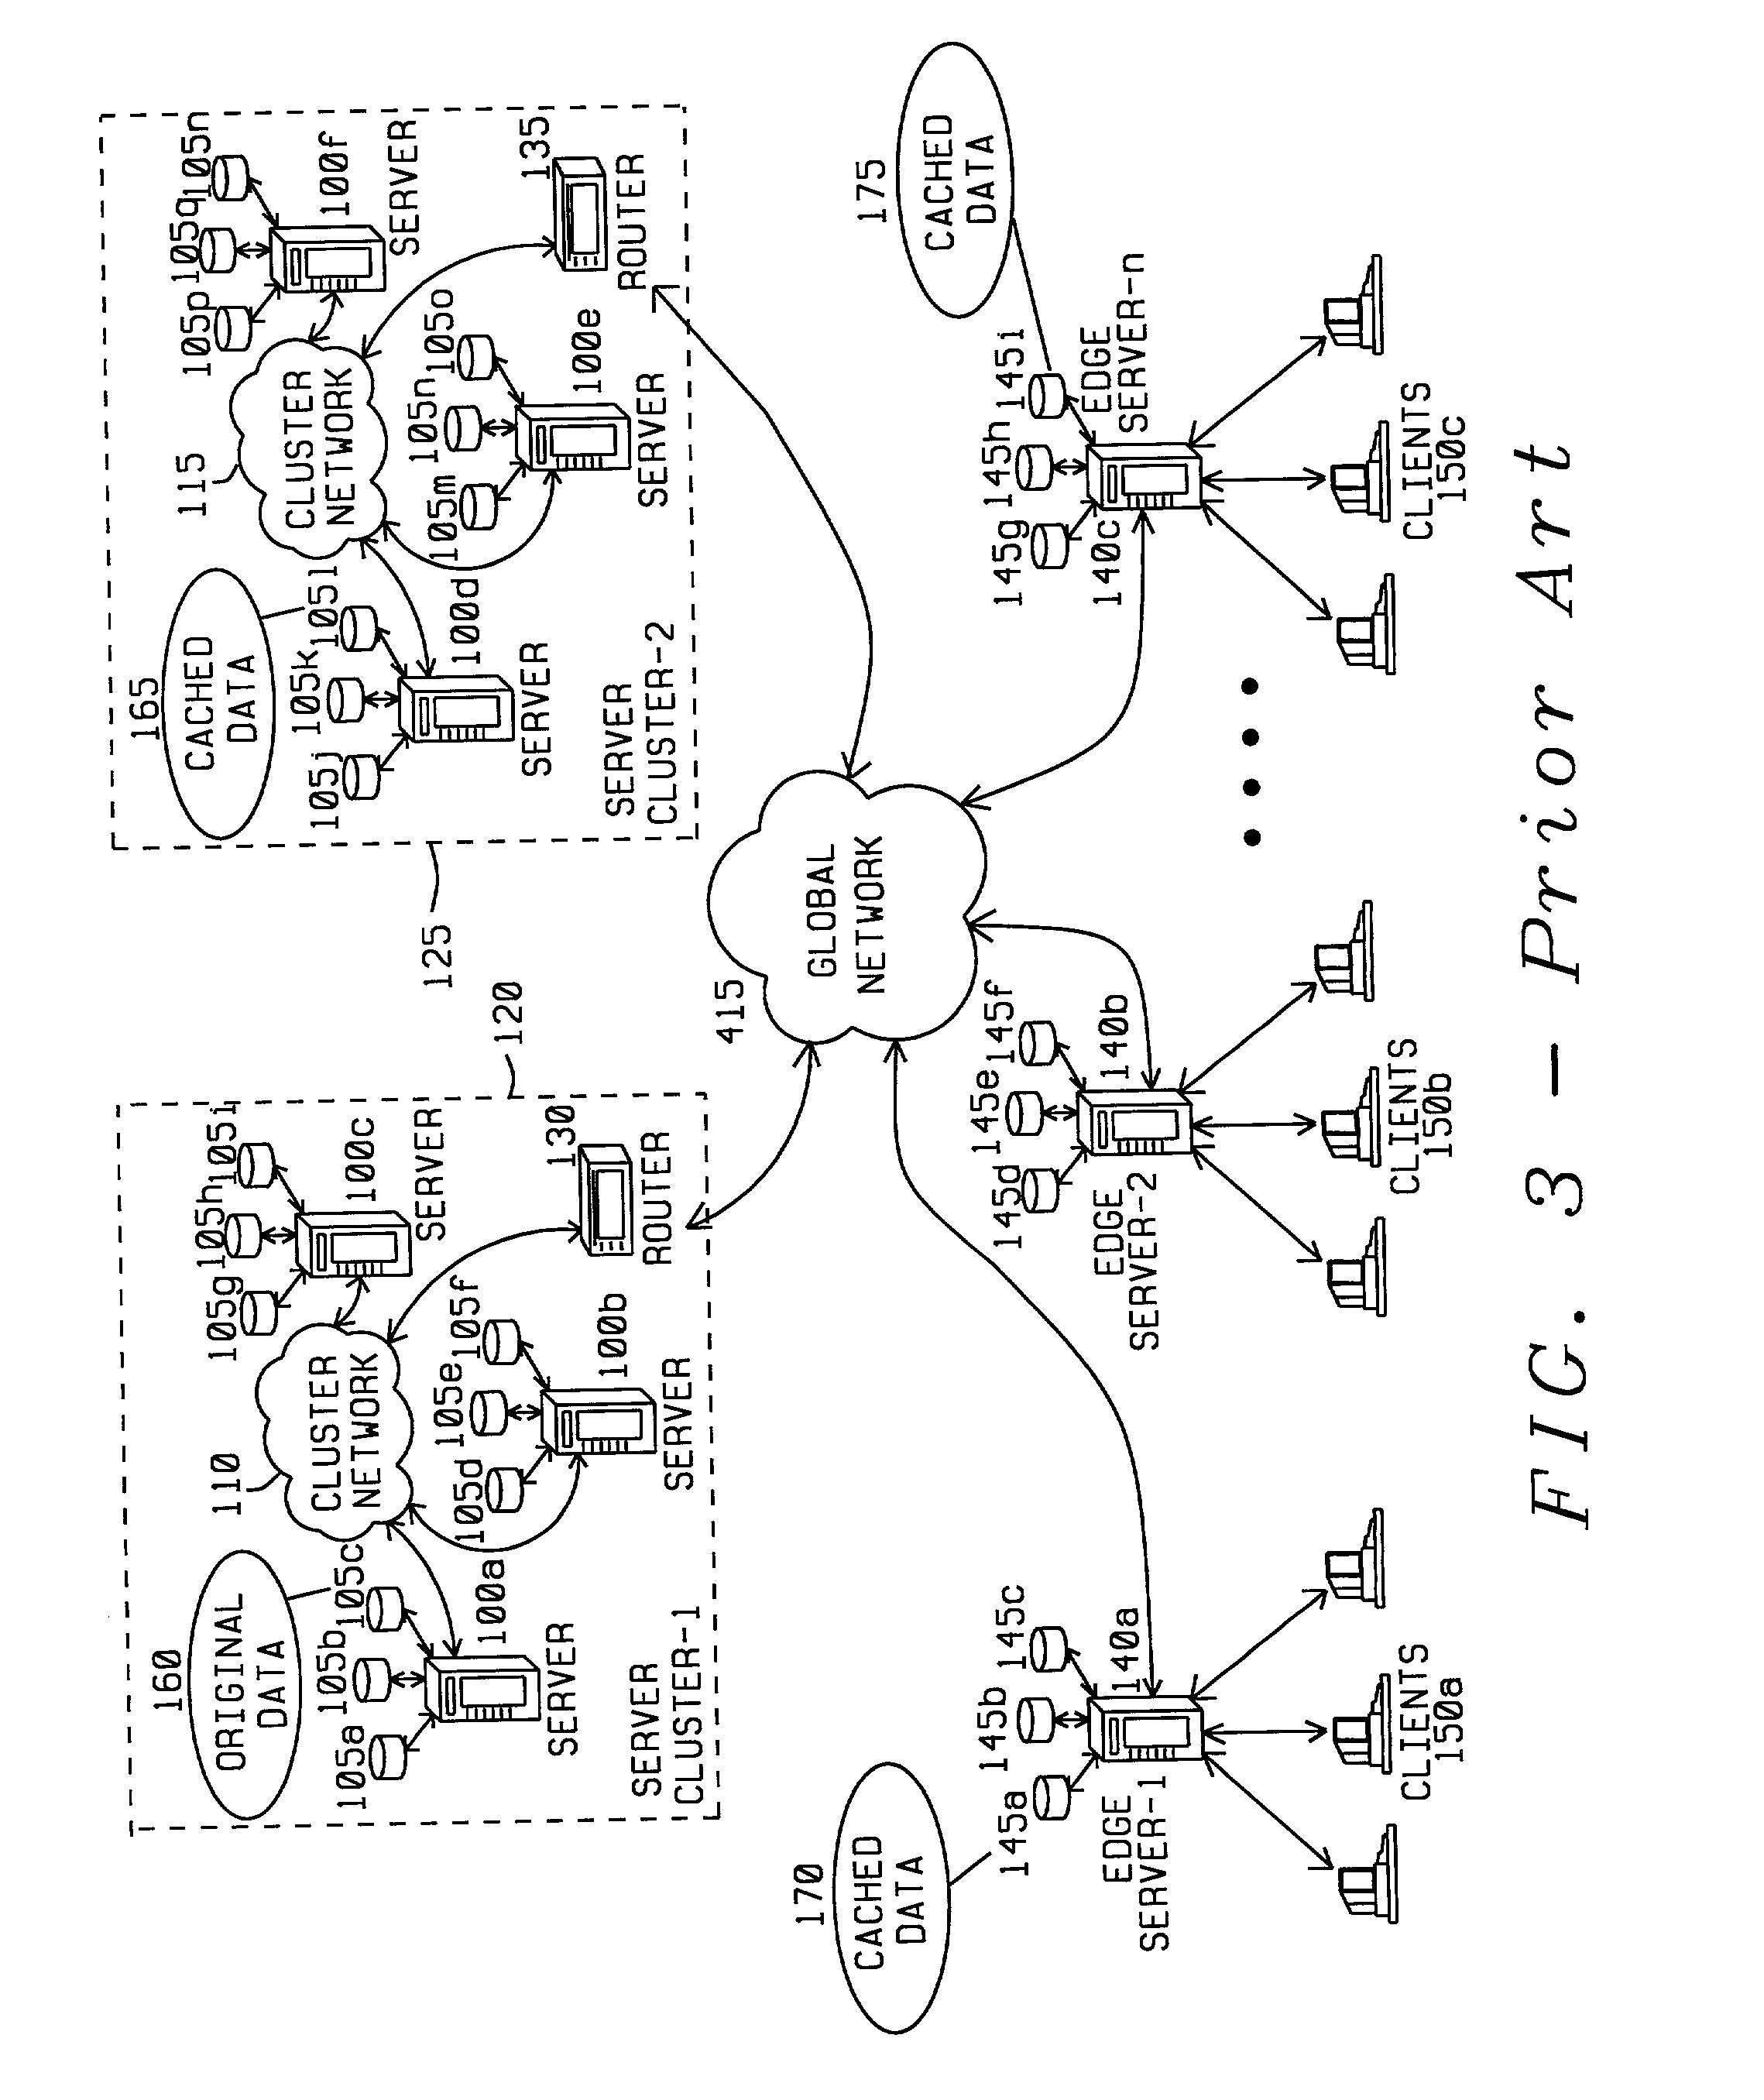 Video distribution system using dynamic disk load balancing with variable sub-segmenting